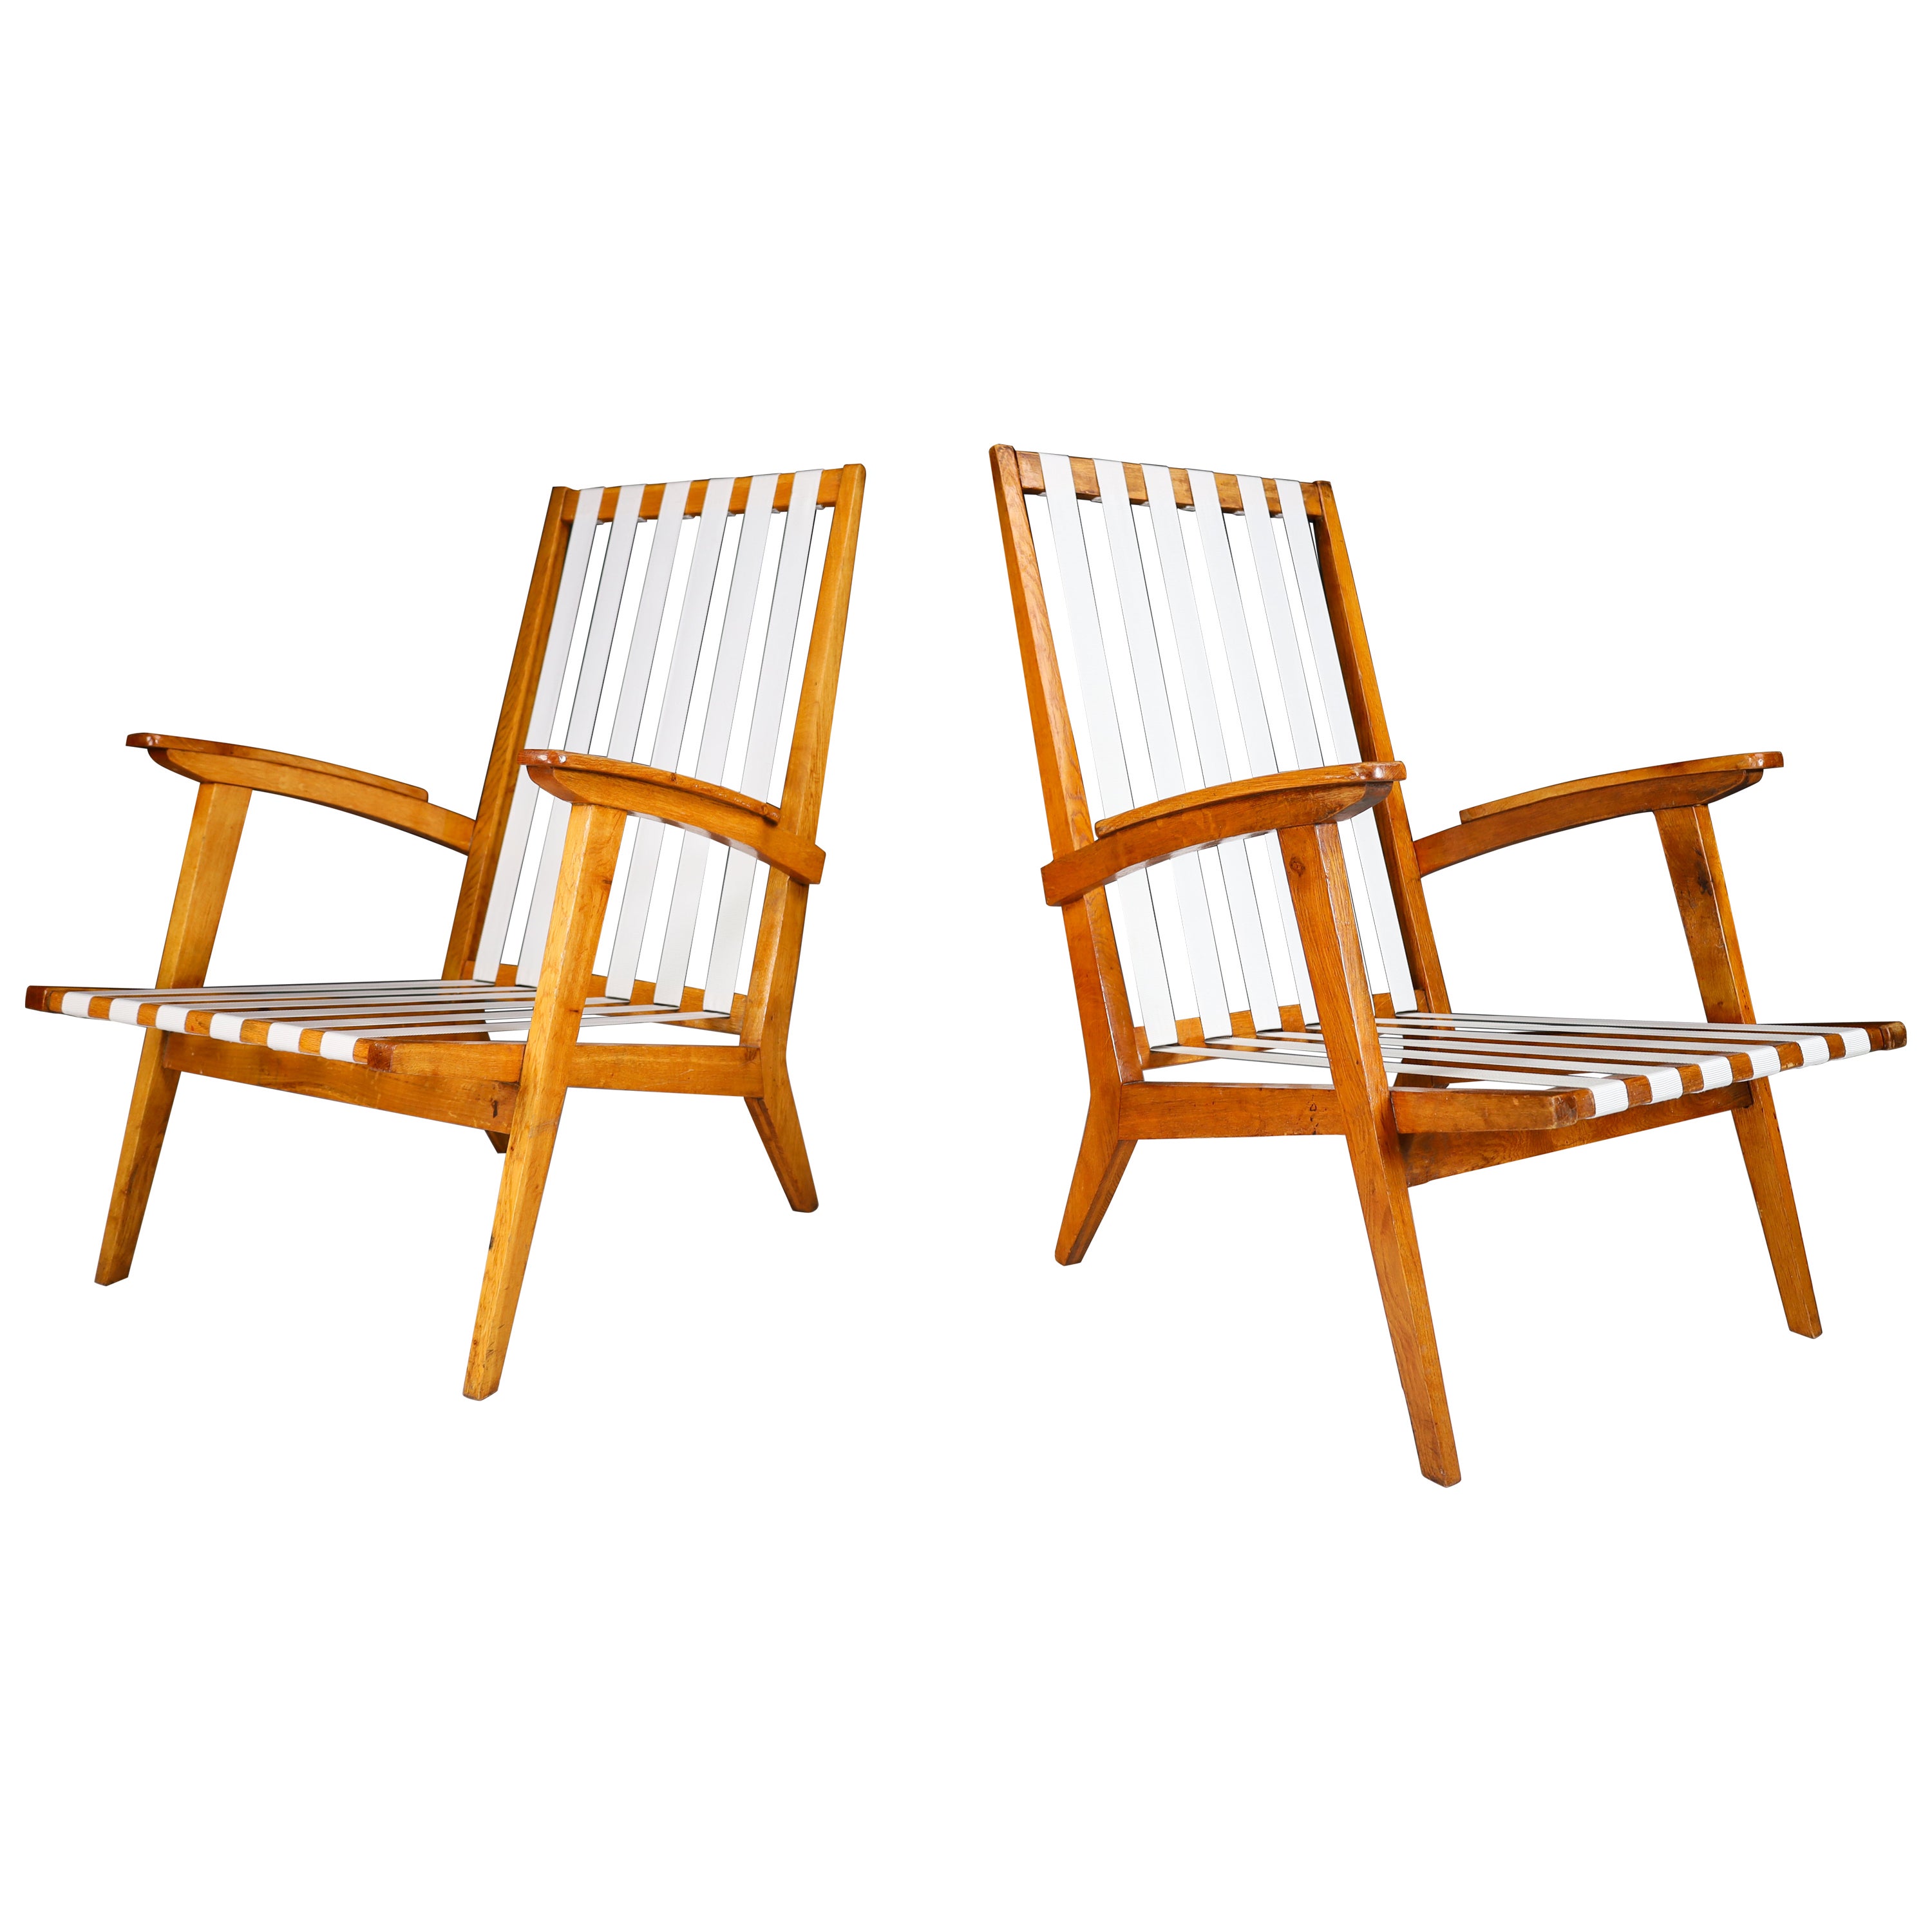 Sculptural Lounge Chairs in Oak, France 1950s For Sale